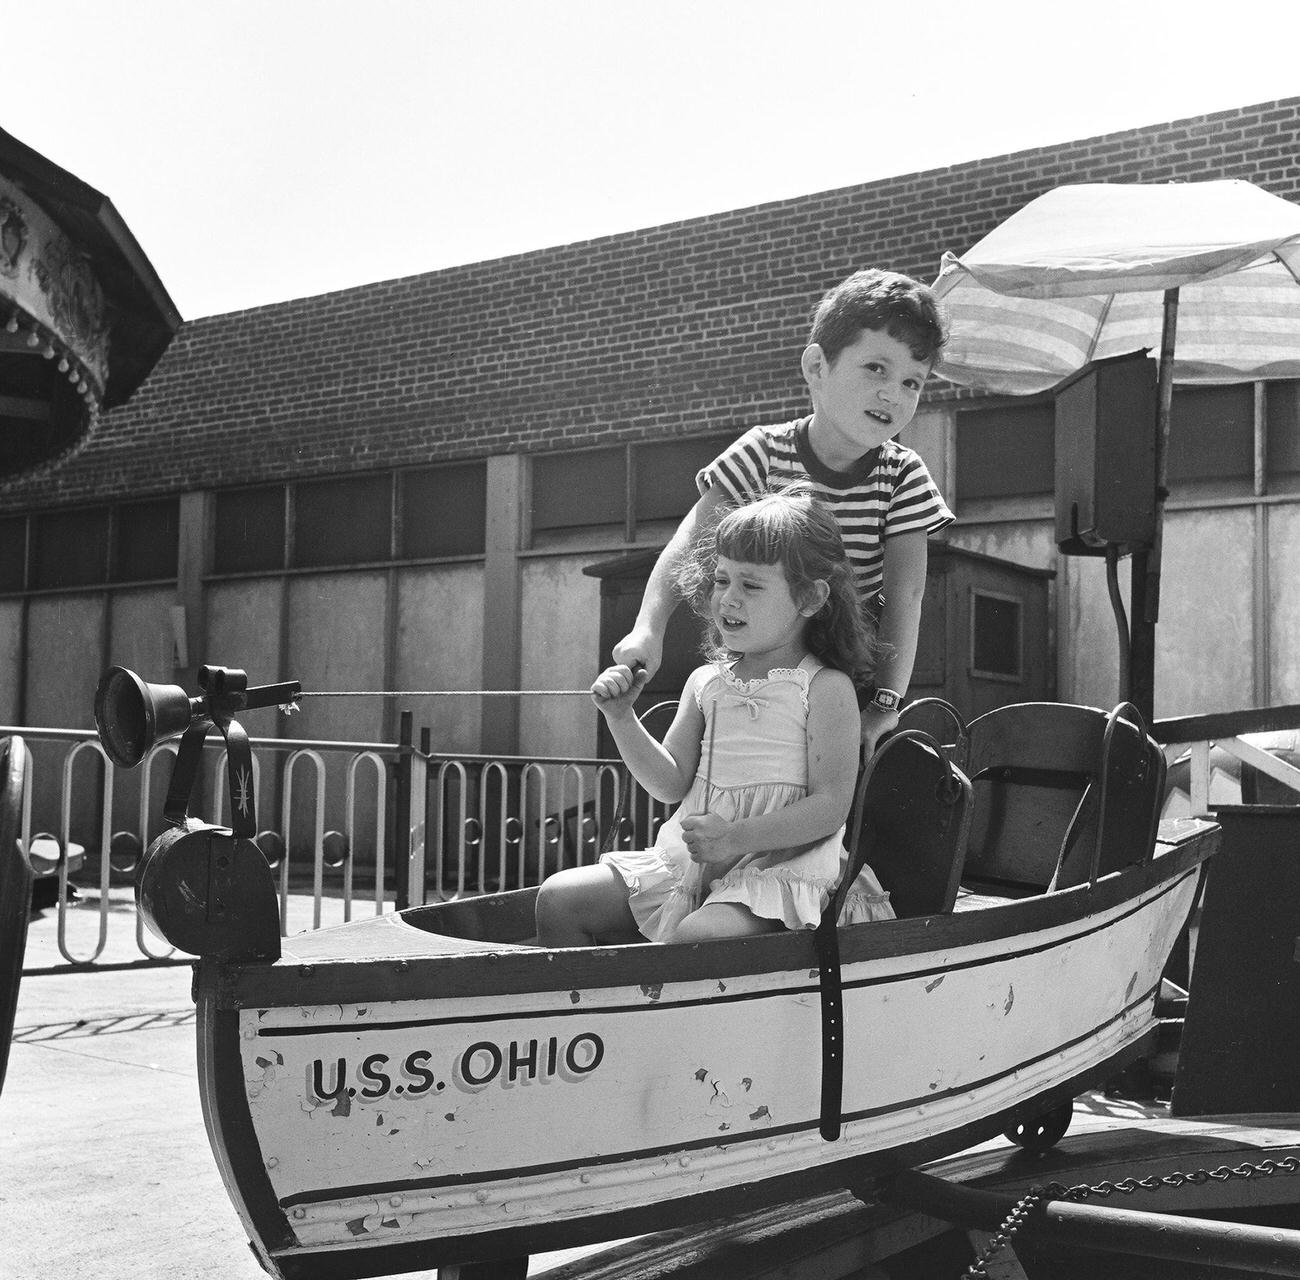 Siblings Enjoying A Wooden Uss Ohio Ride At Coney Island, 1948